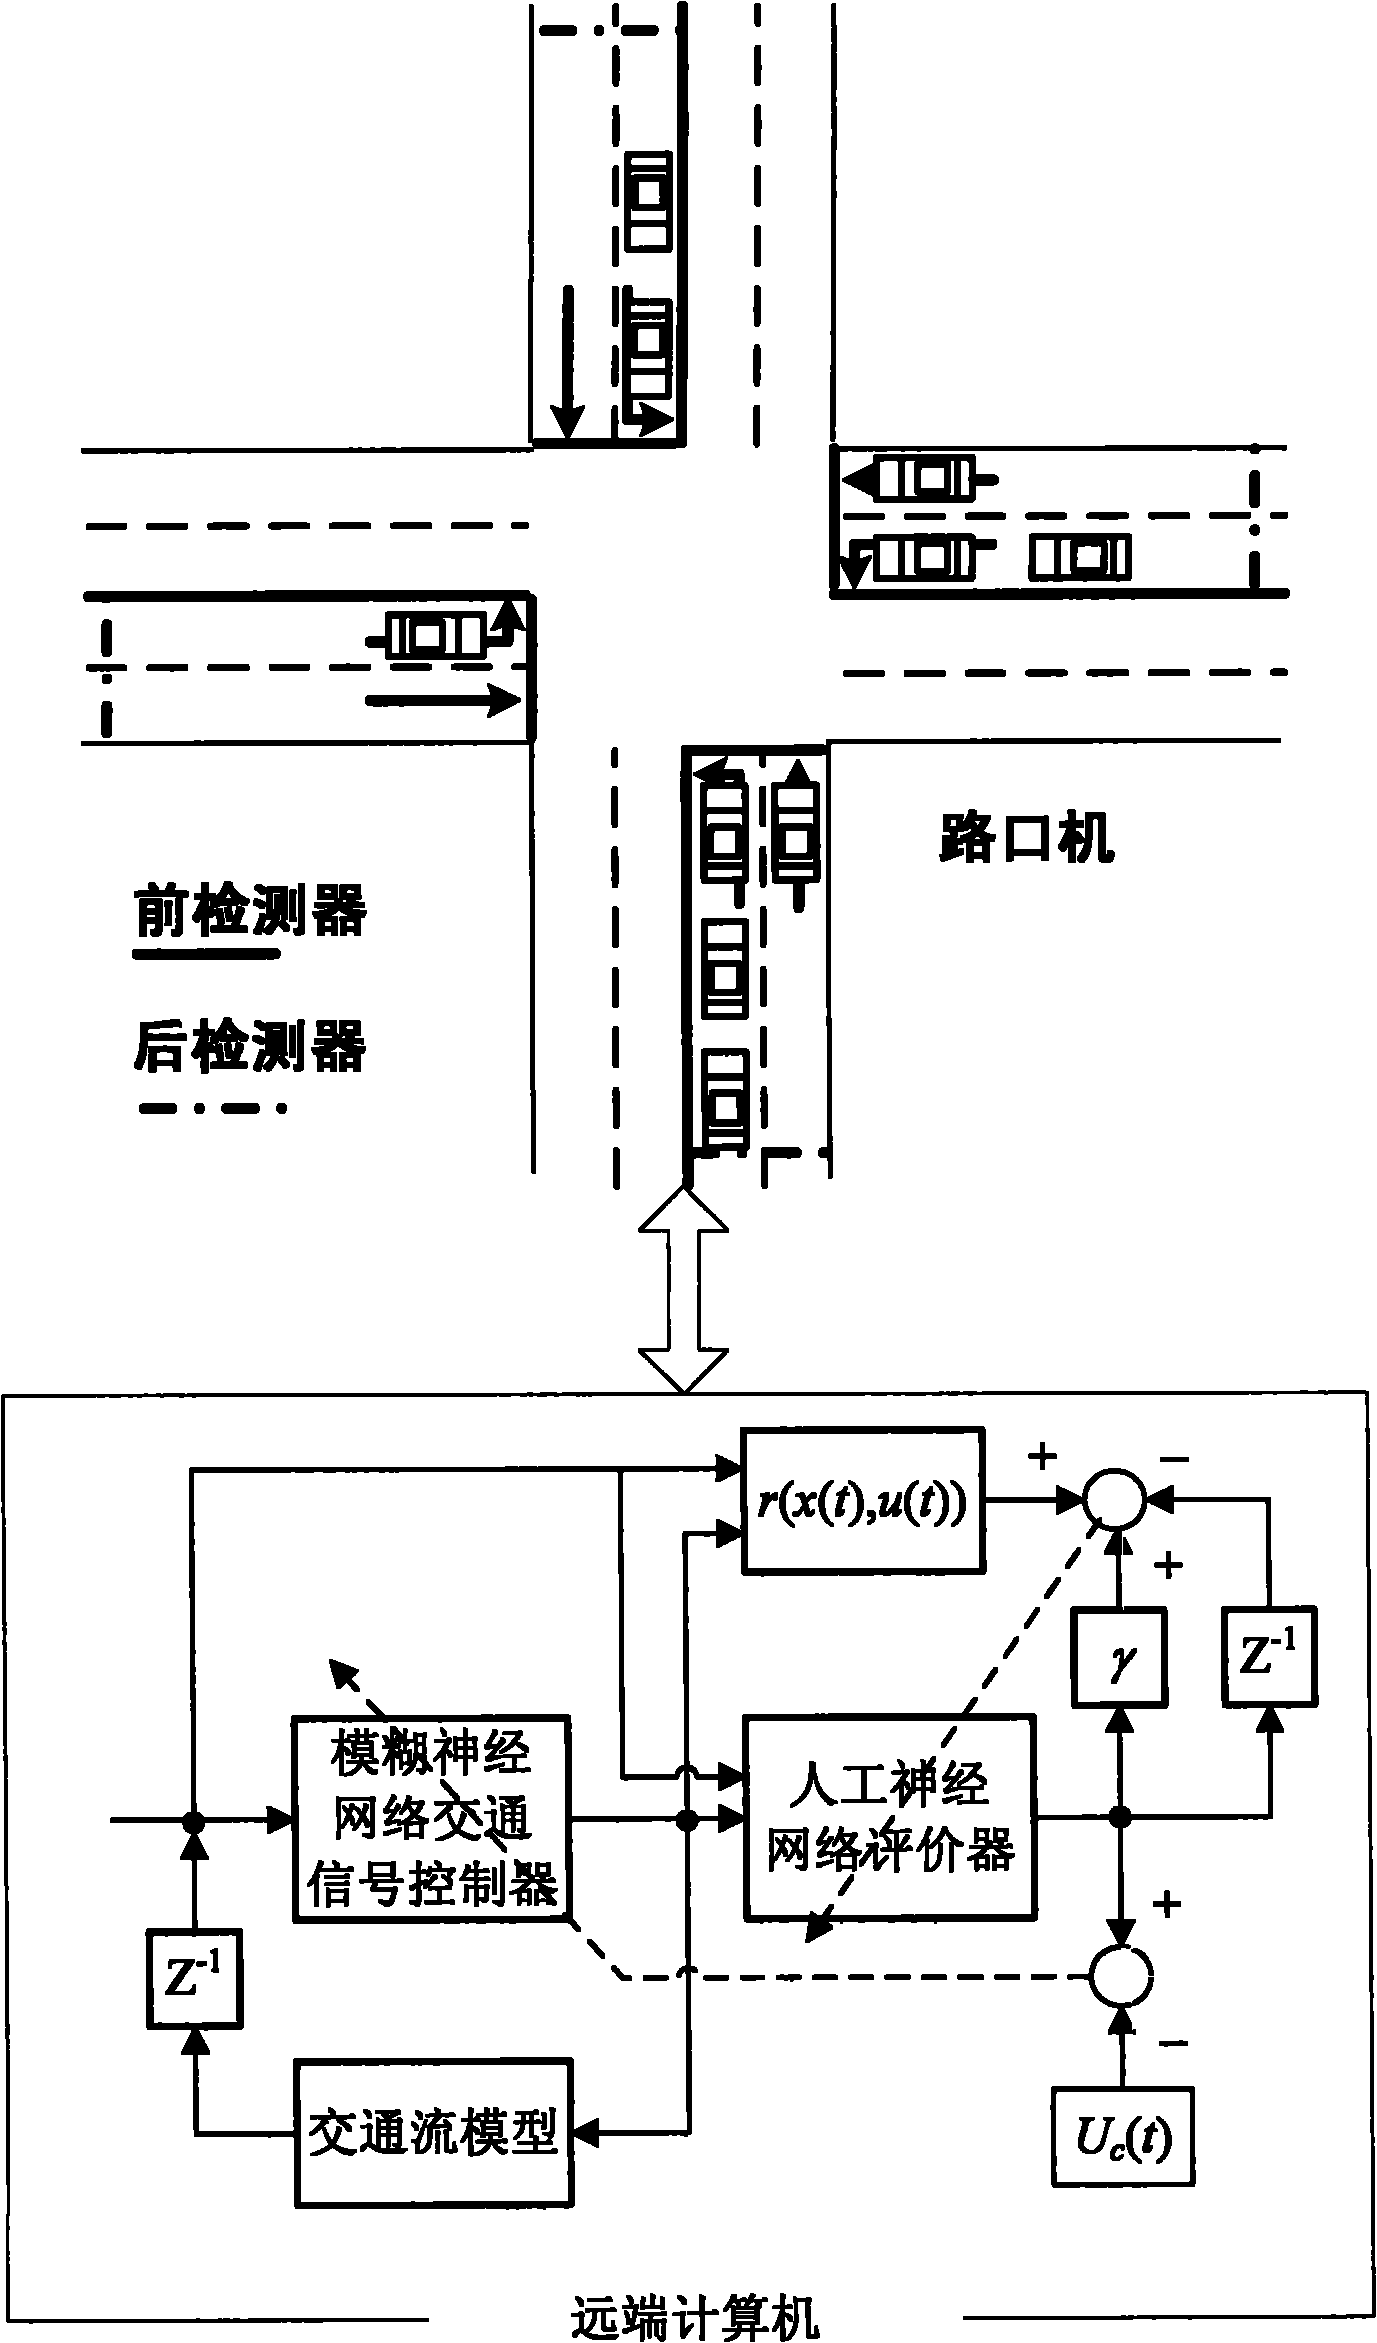 Optimized control method for traffic signals at road junction